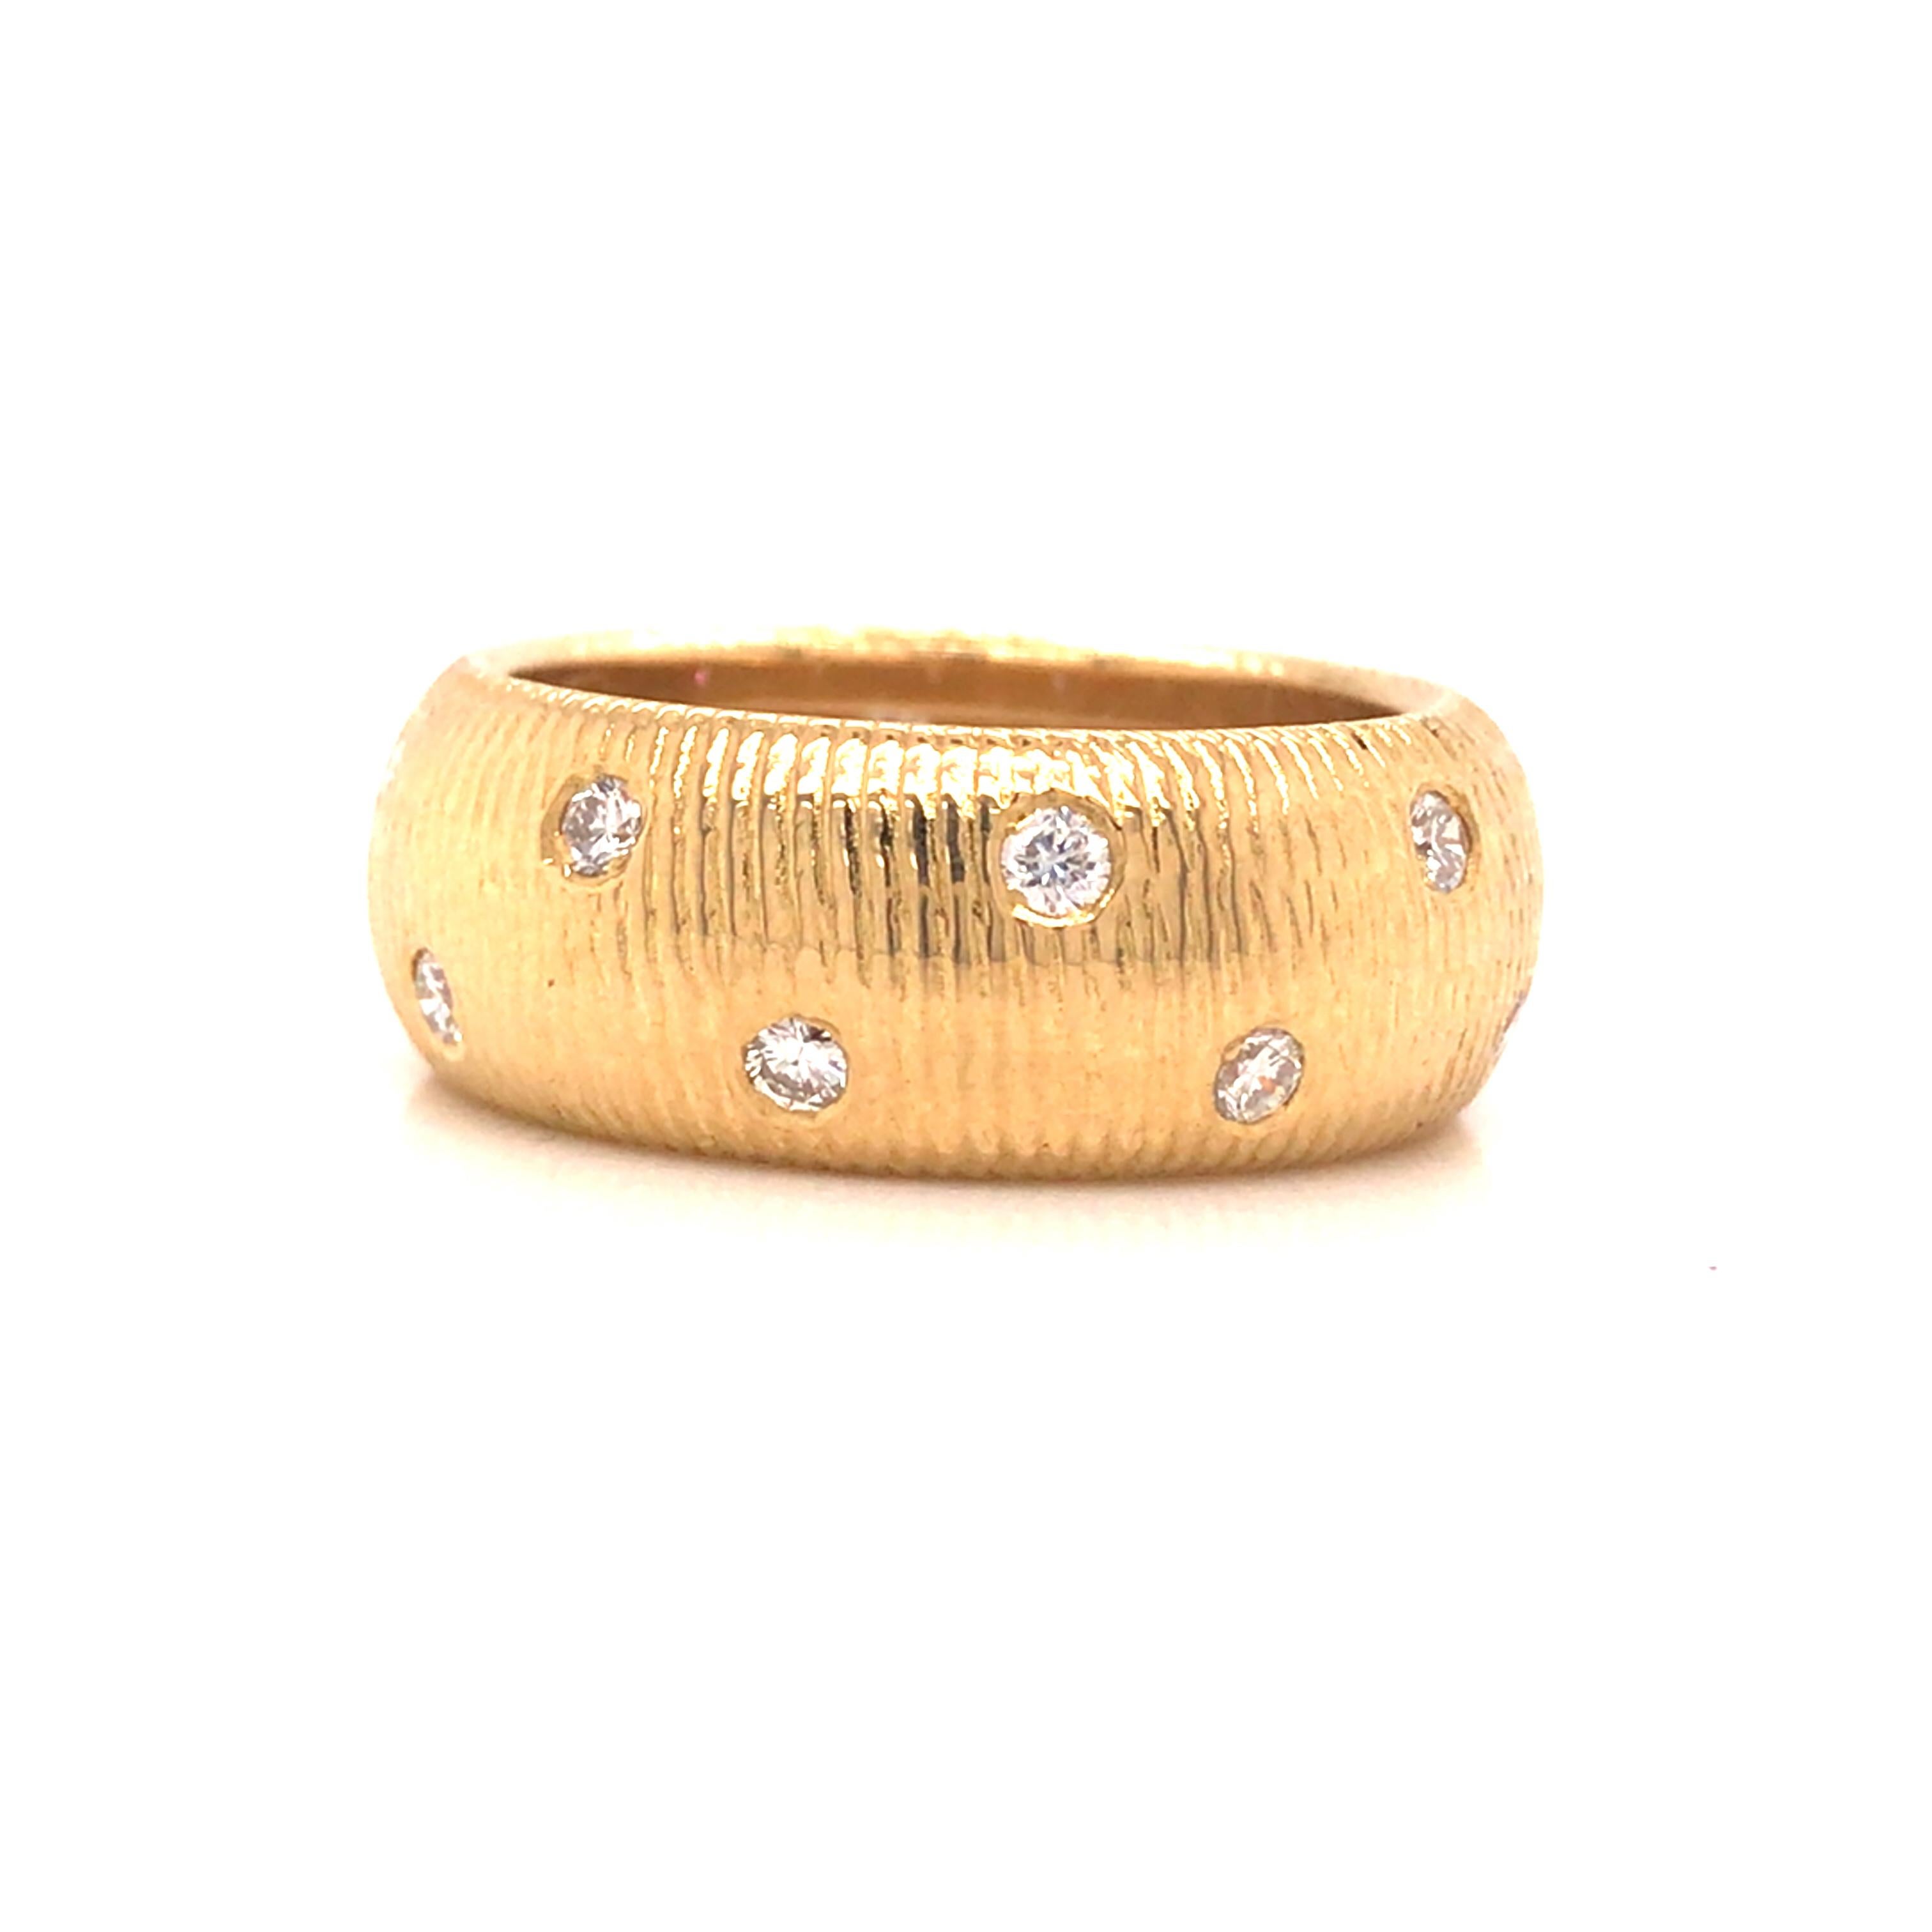 Morelli Textured Diamond Band in 18K Yellow Gold. (16) Round Brilliant Cut Diamonds weighing 0.80 carat total weight, G-H in color and VS in clarity are expertly bevel set. The ring measures 3/8 inch in width.   Ring size 8 1/2. 10.57 grams. Stamped